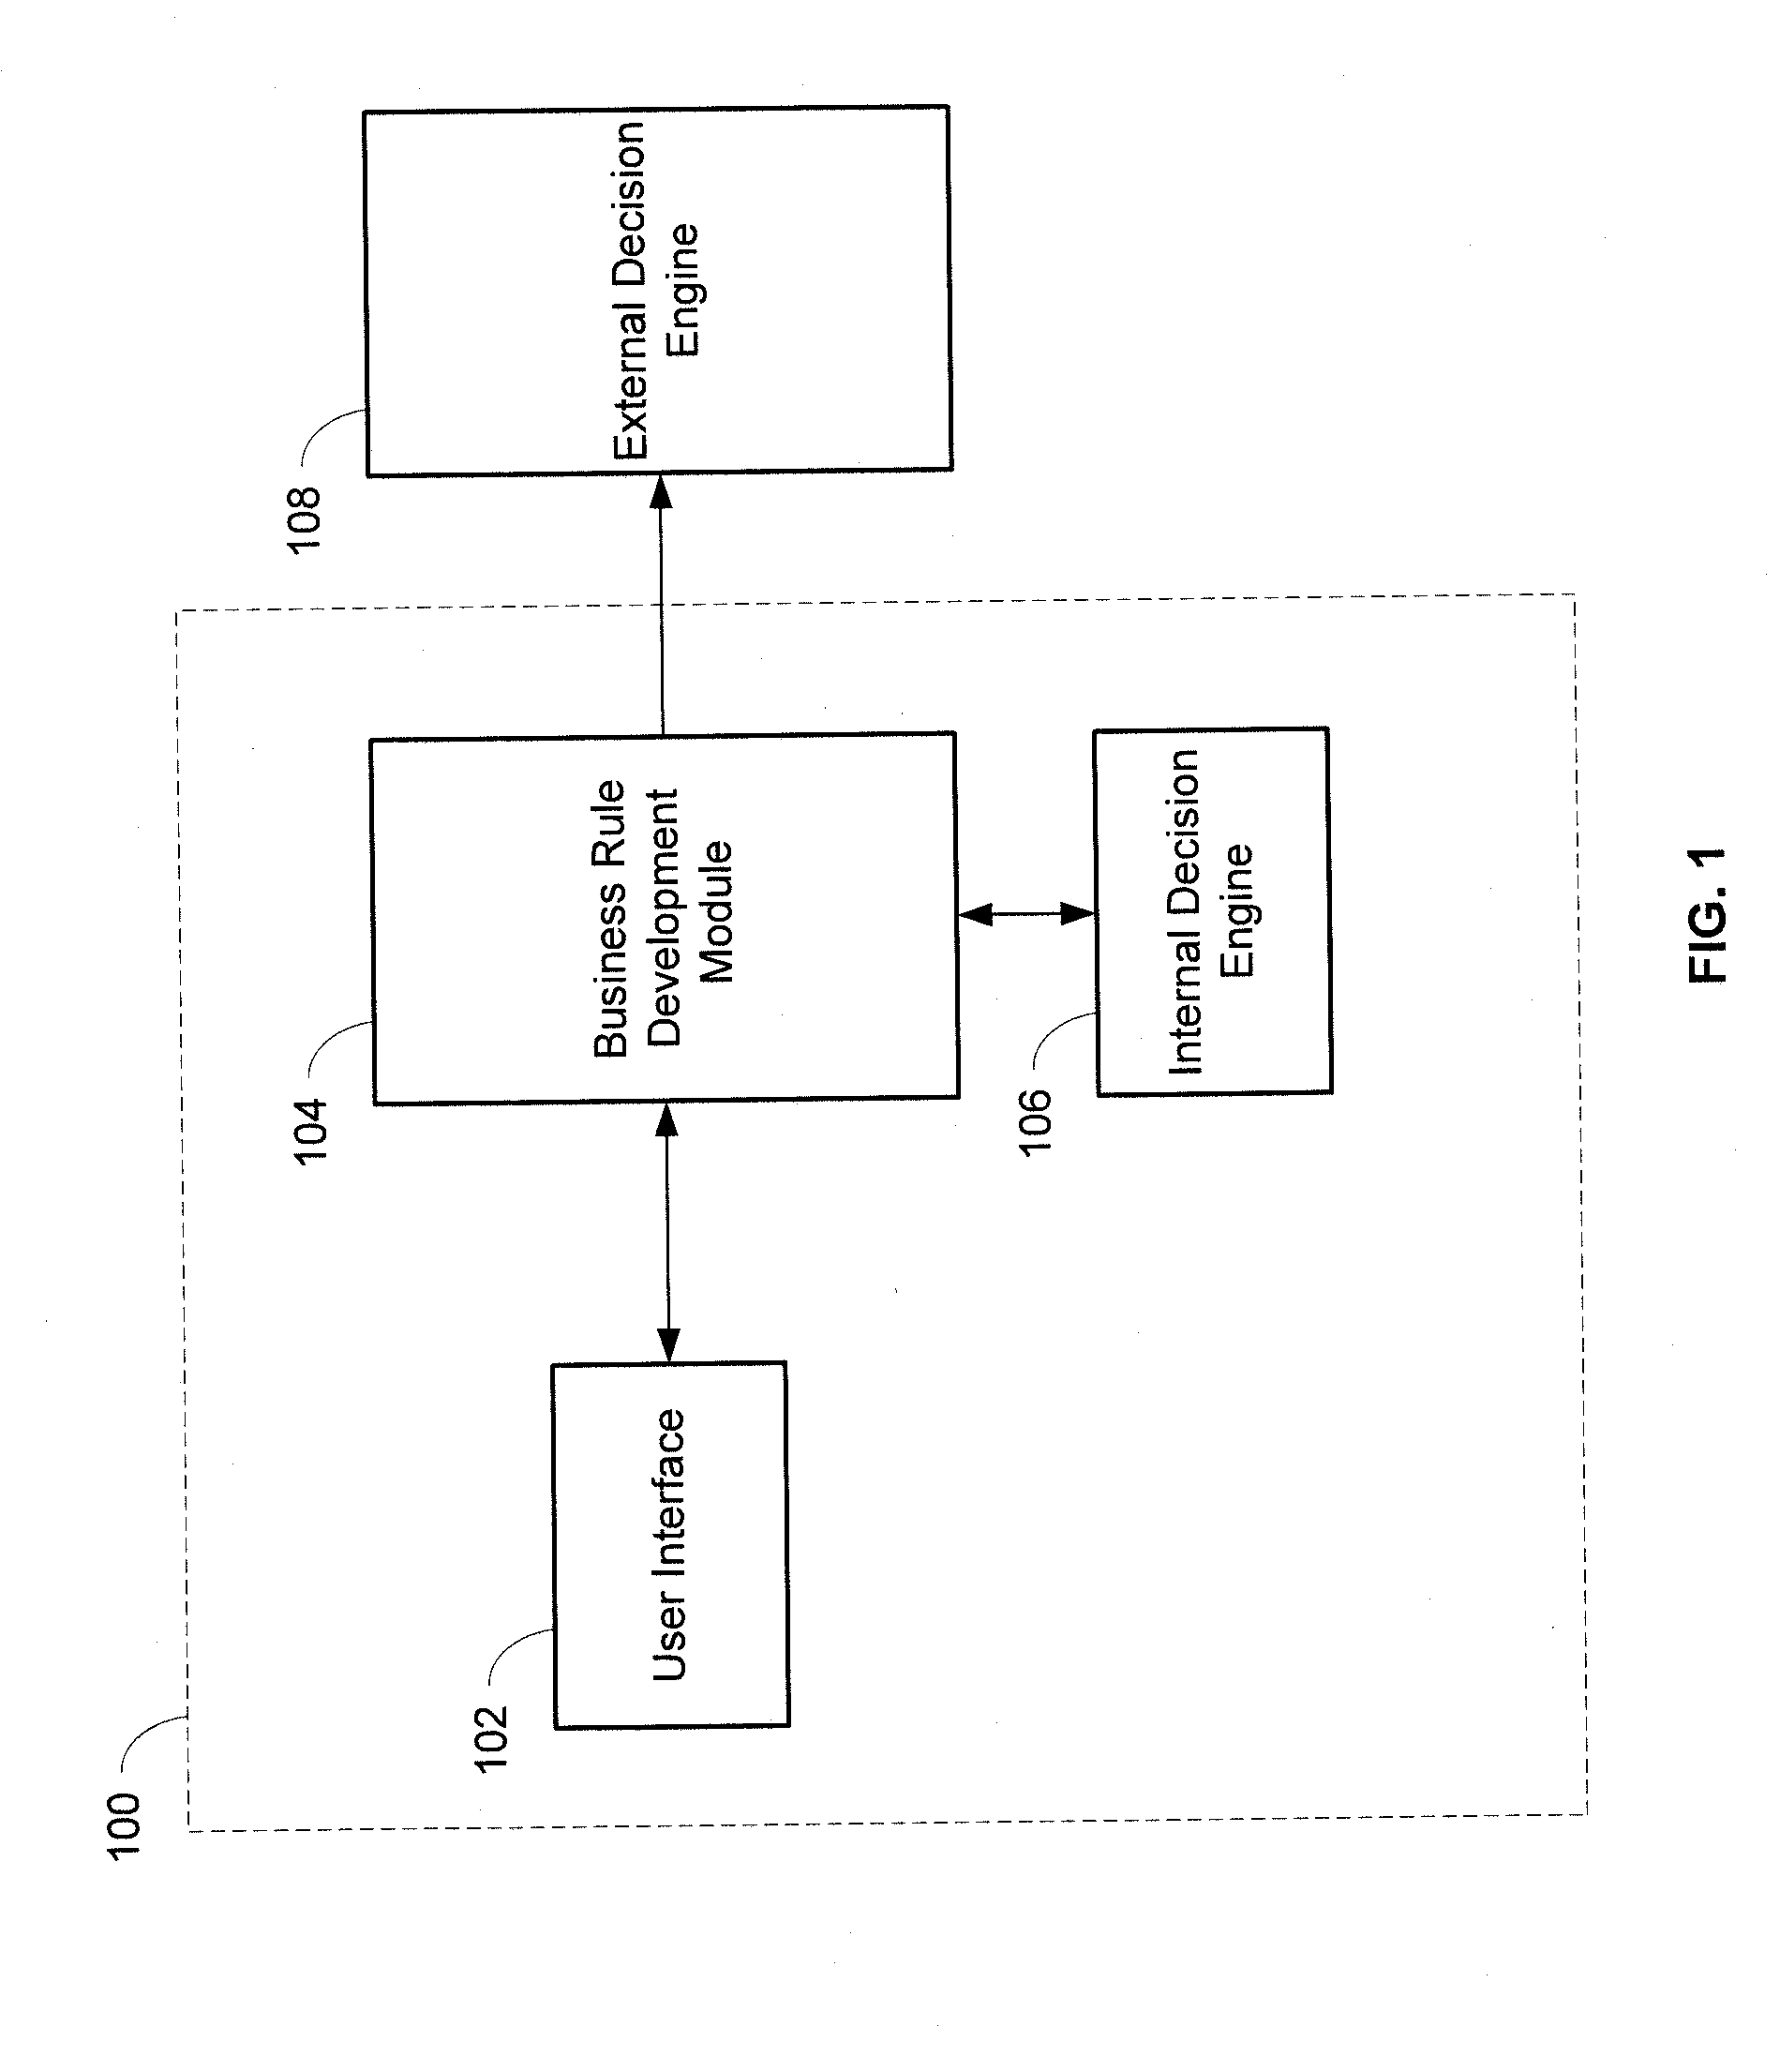 System and method for developing business rules for decision engines